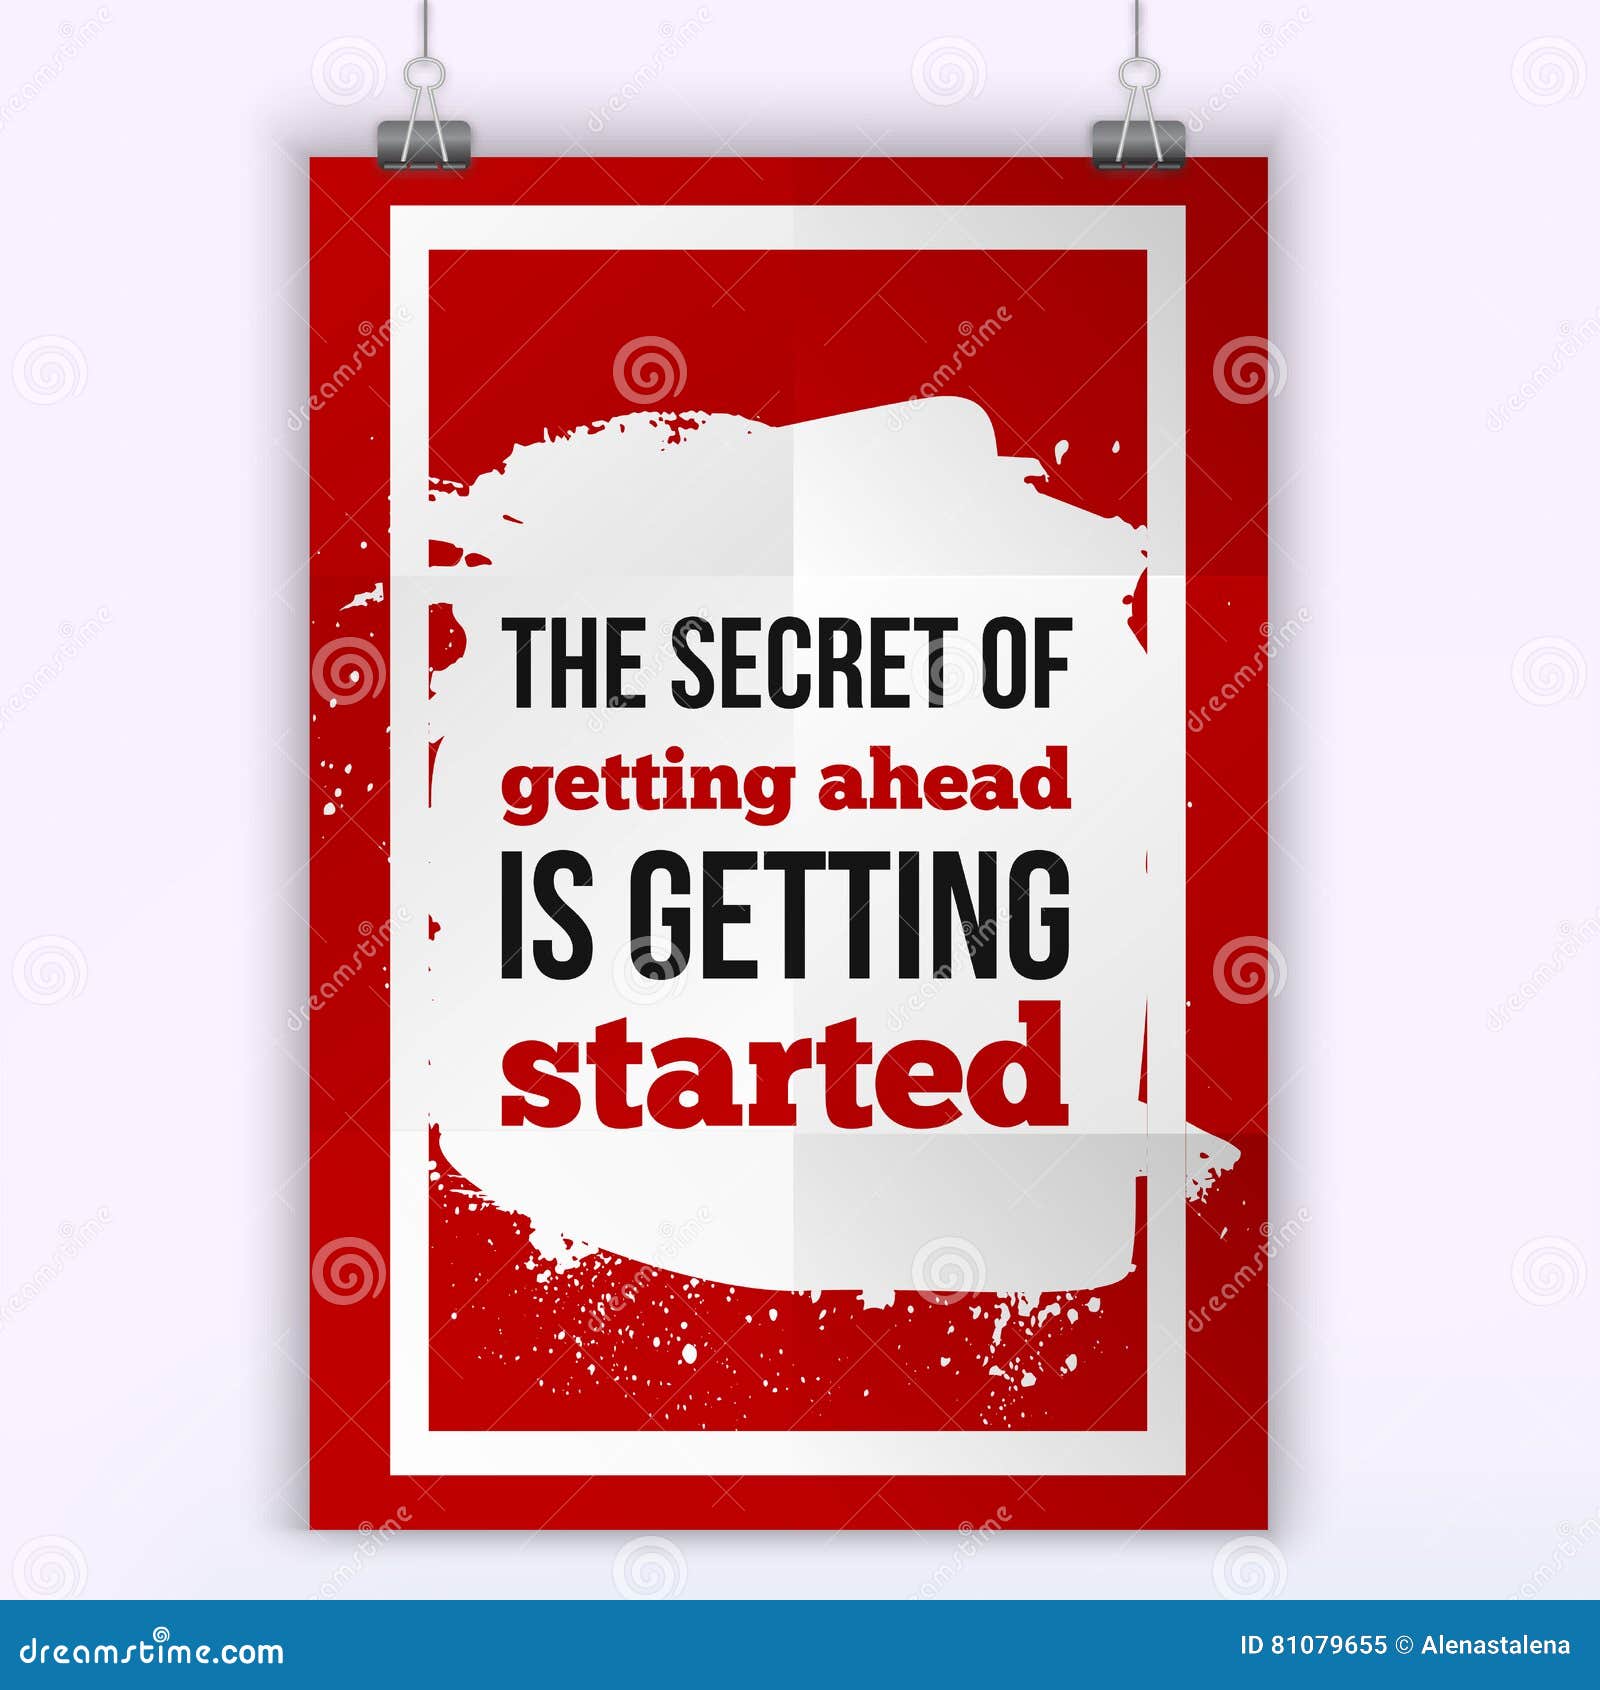 https://thumbs.dreamstime.com/z/secret-getting-ahead-getting-started-motivation-victory-quote-poster-template-invitation-greeting-cards-t-shirt-81079655.jpg